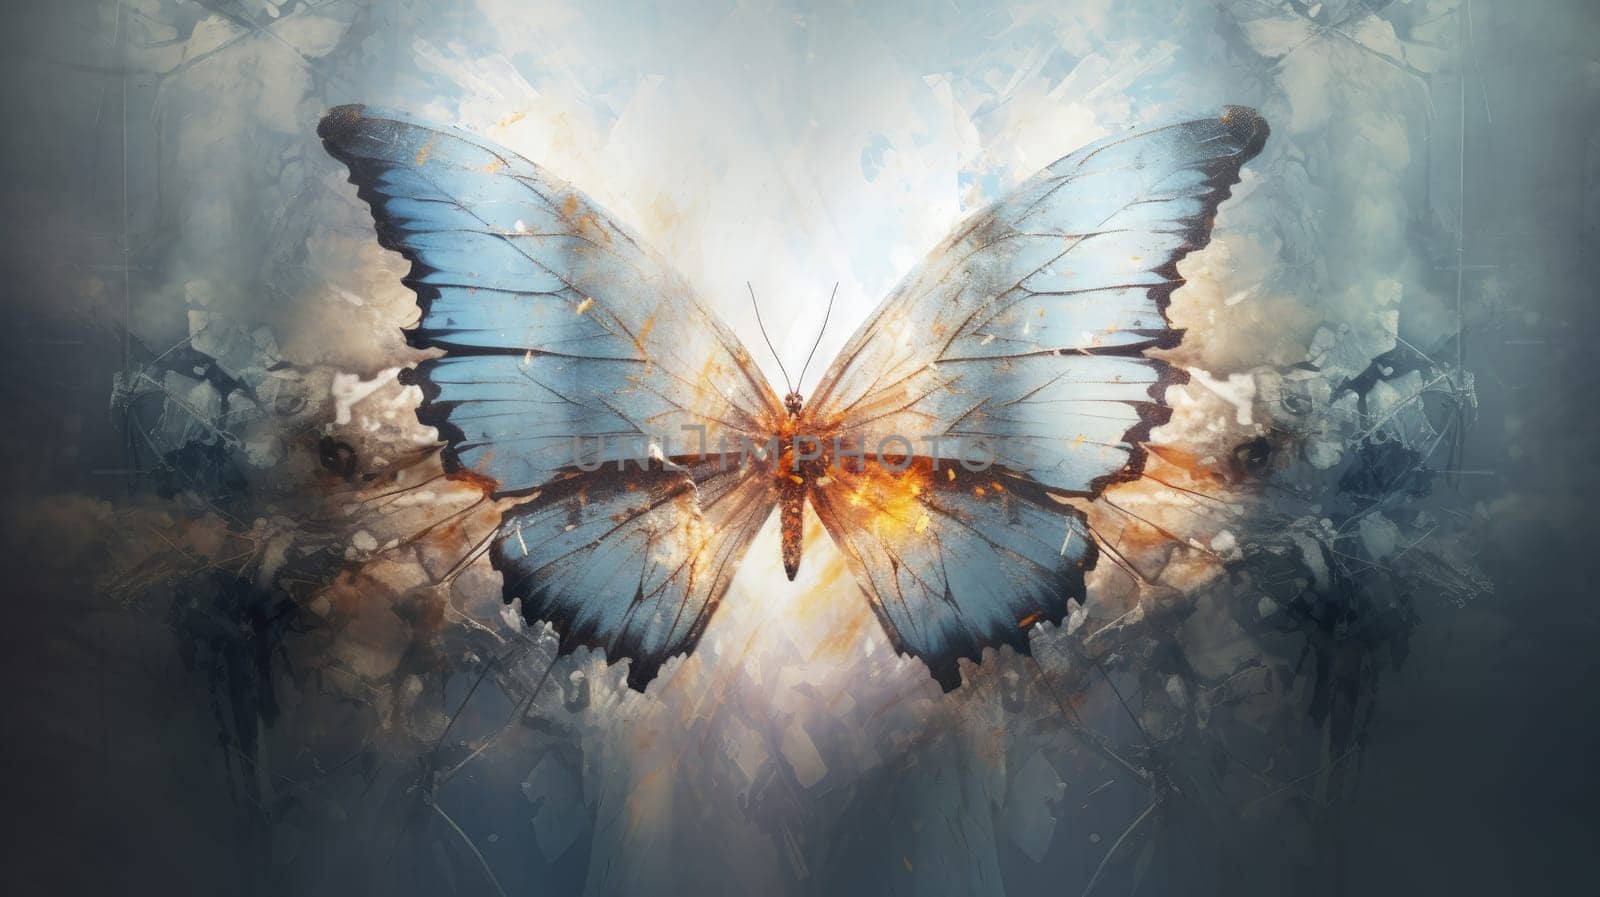 A butterfly depicted in a dissolved style, its a delicate wings and form seemingly blending into an ethereal and abstract atmosphere by Kadula